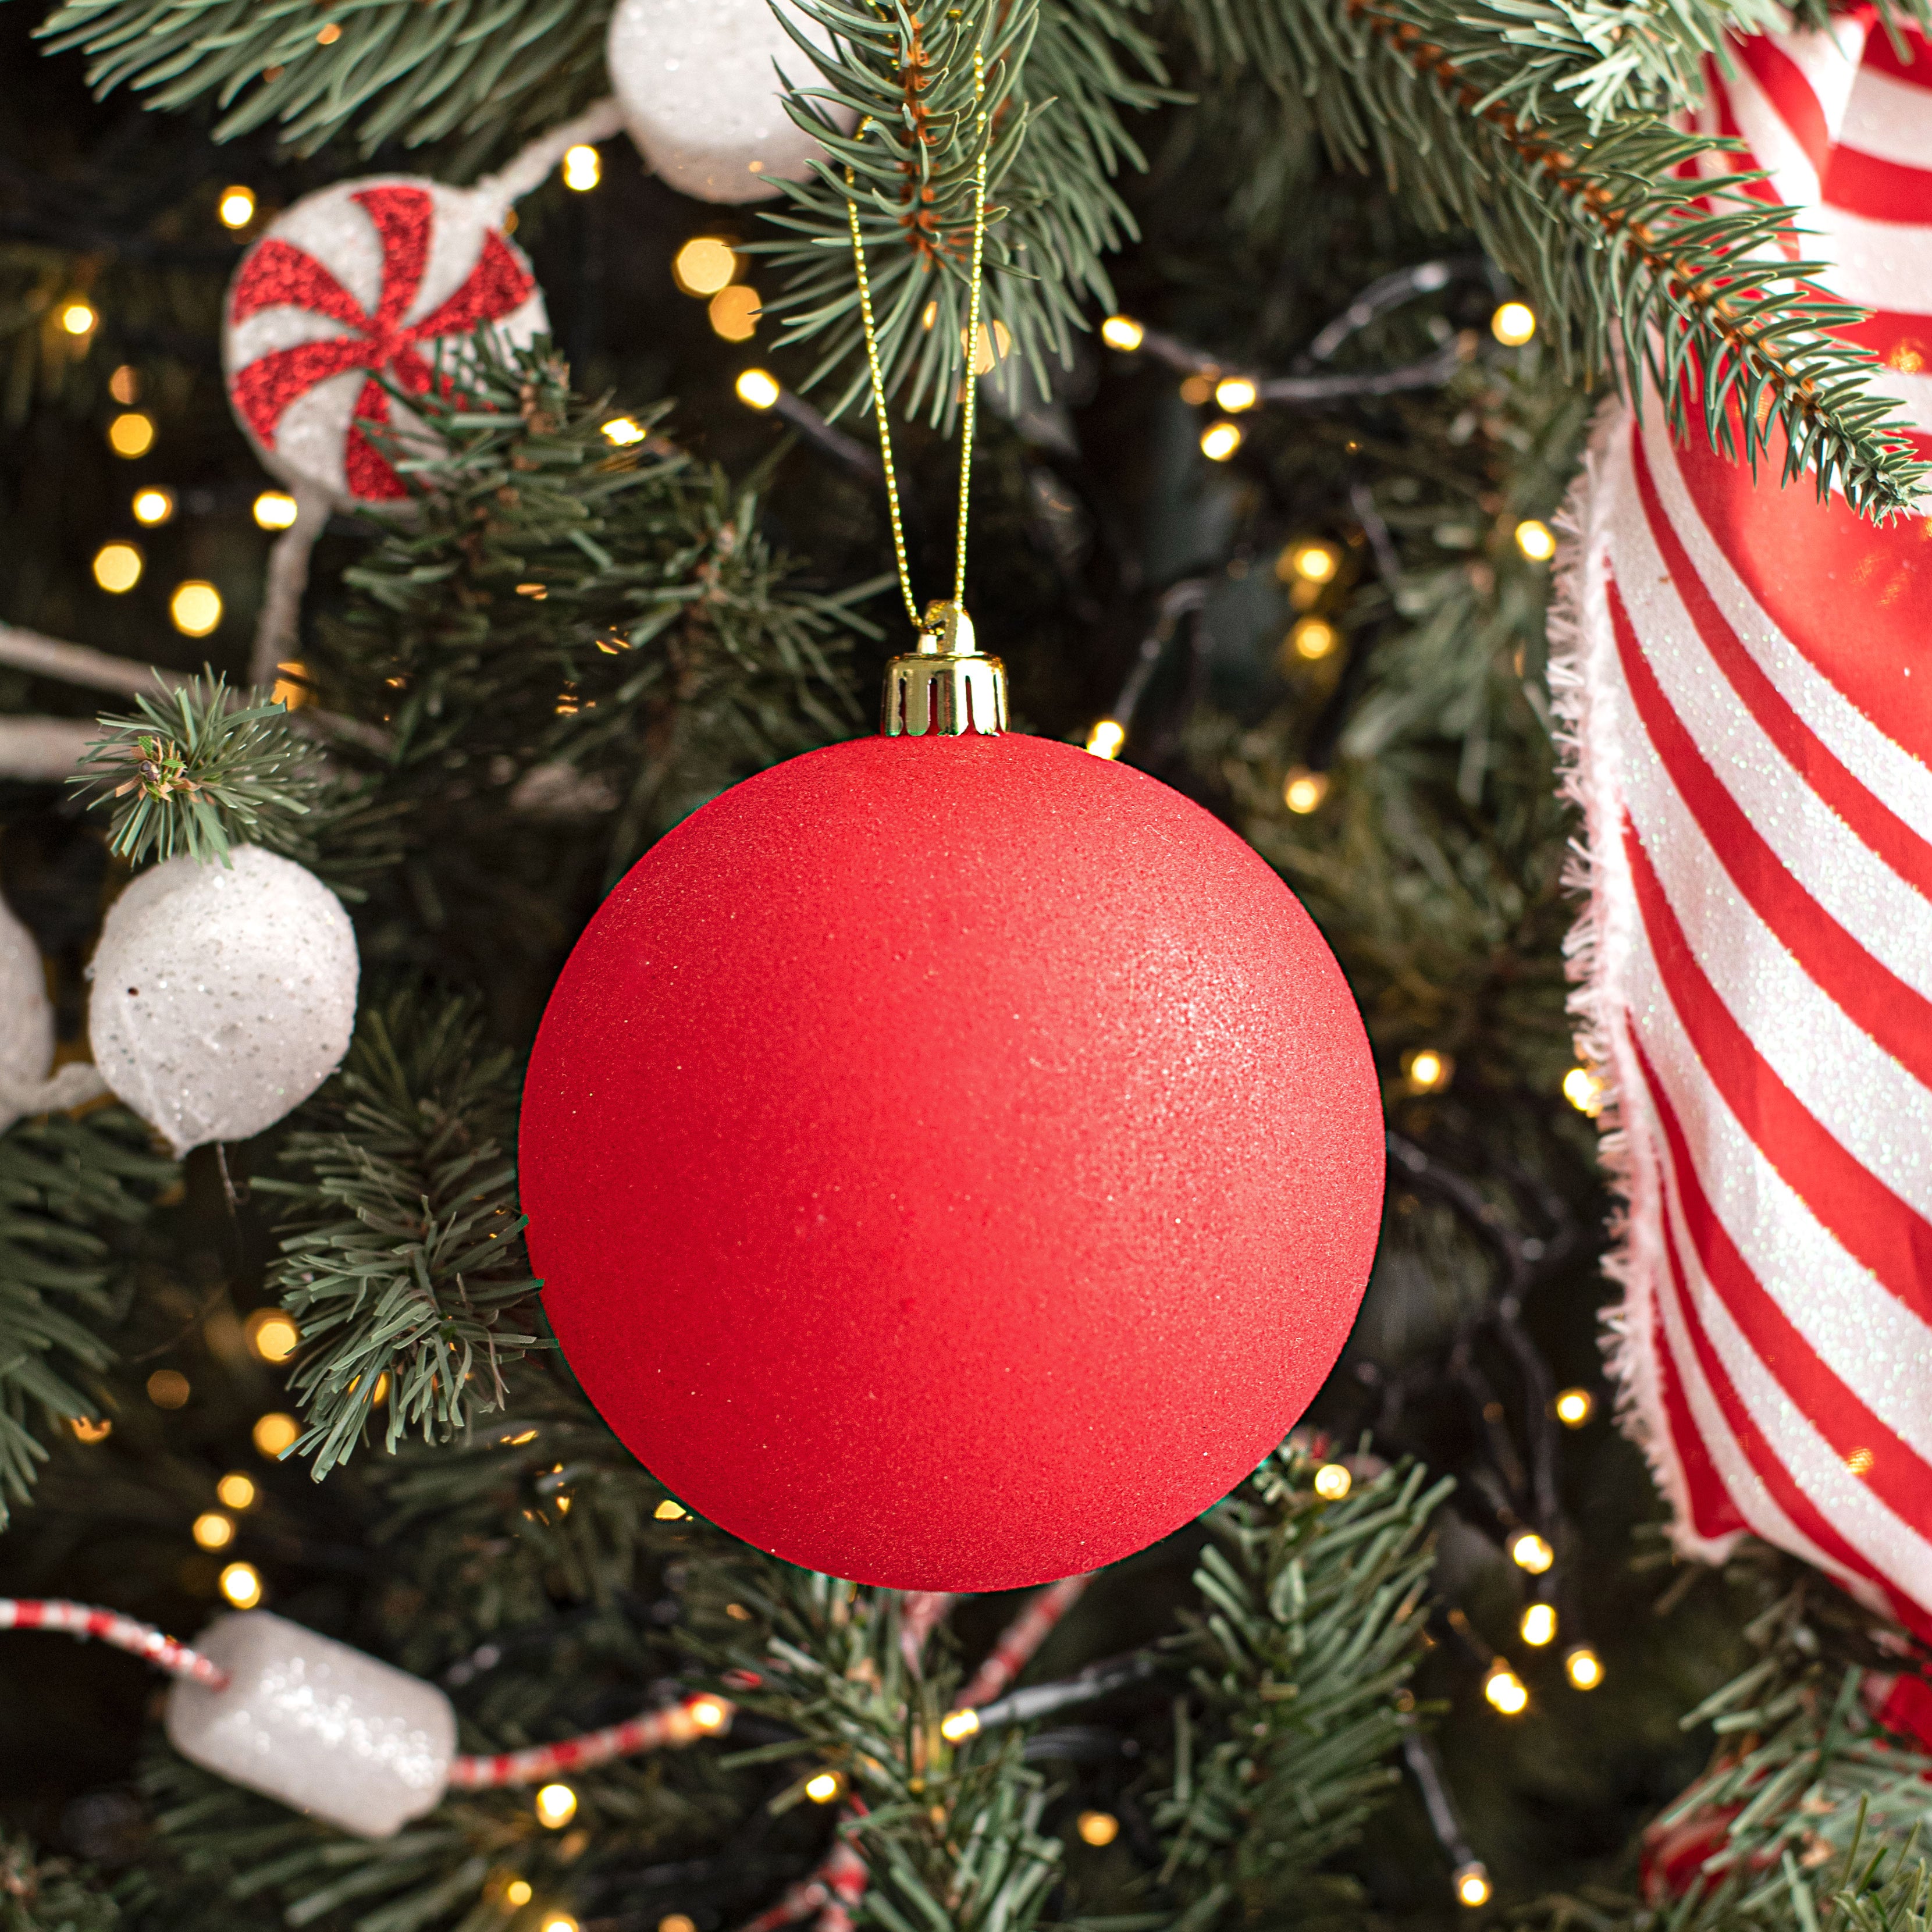 100MM Smooth Flocked Ball Ornament: Red